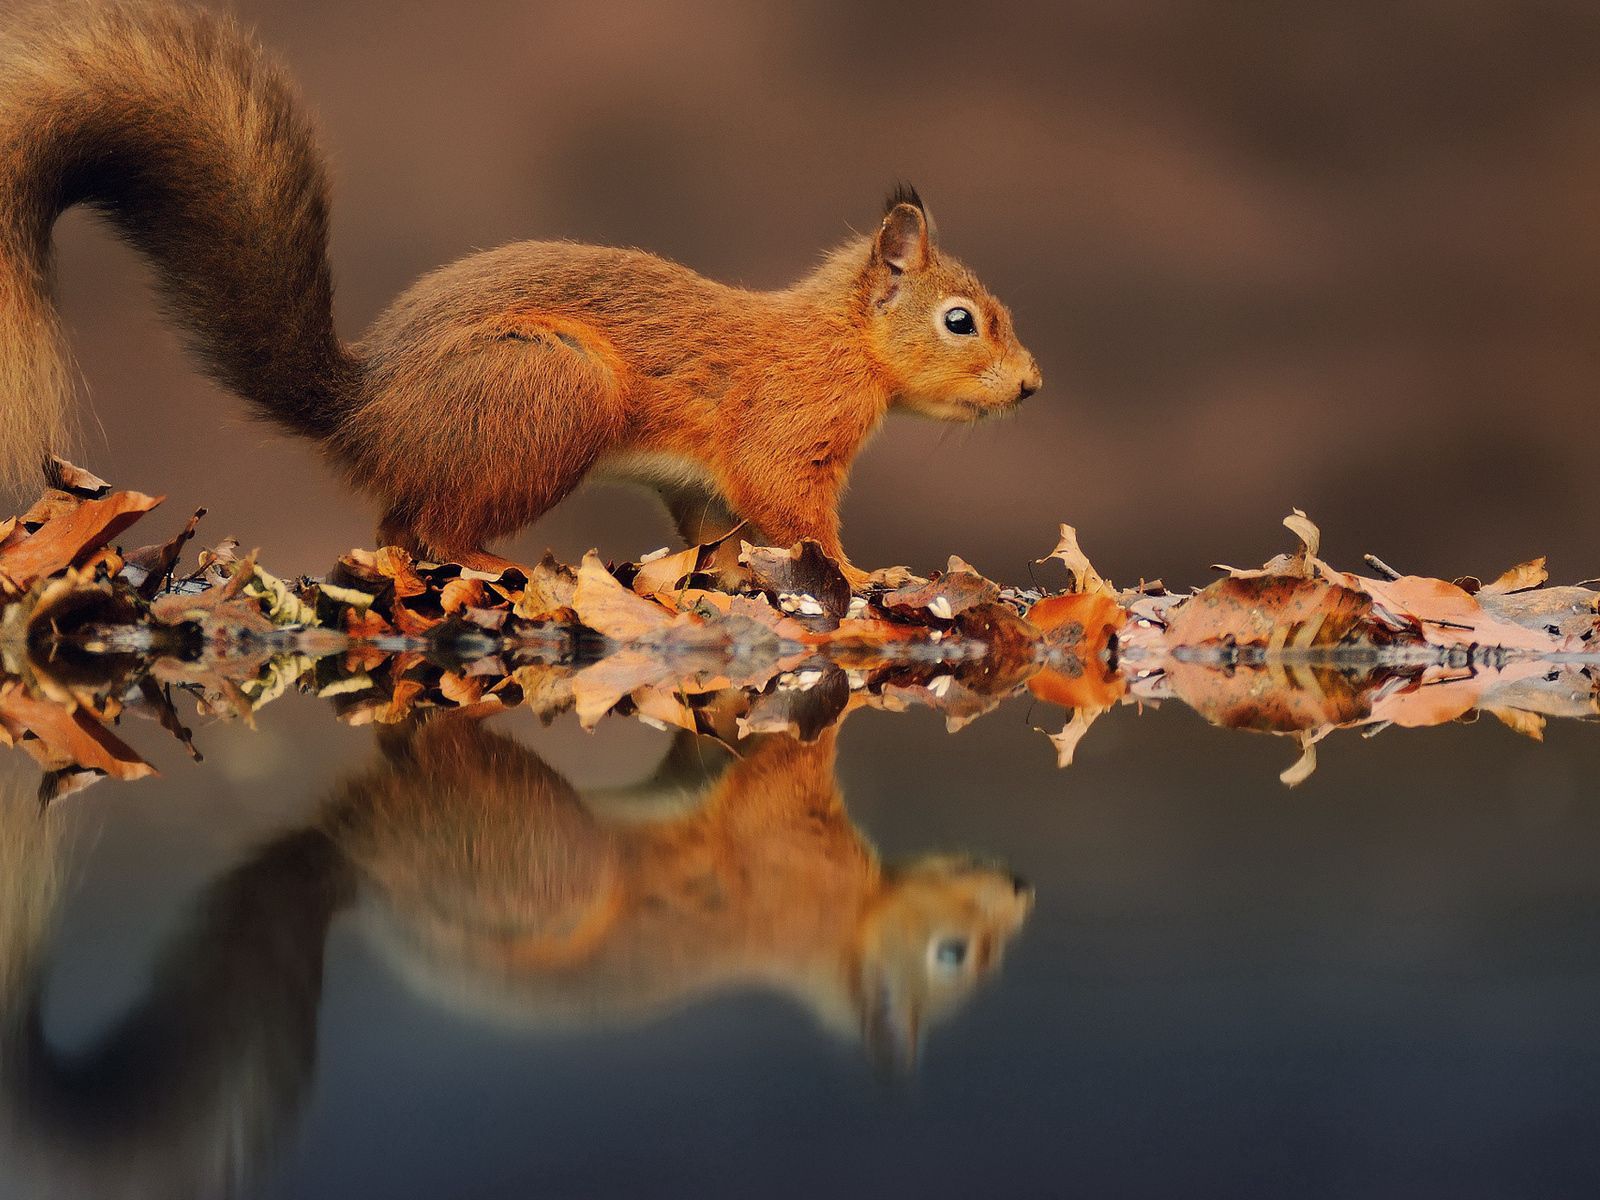 Download wallpaper 1600x1200 squirrel, leaves, reflection, water, autumn standard 4:3 HD background